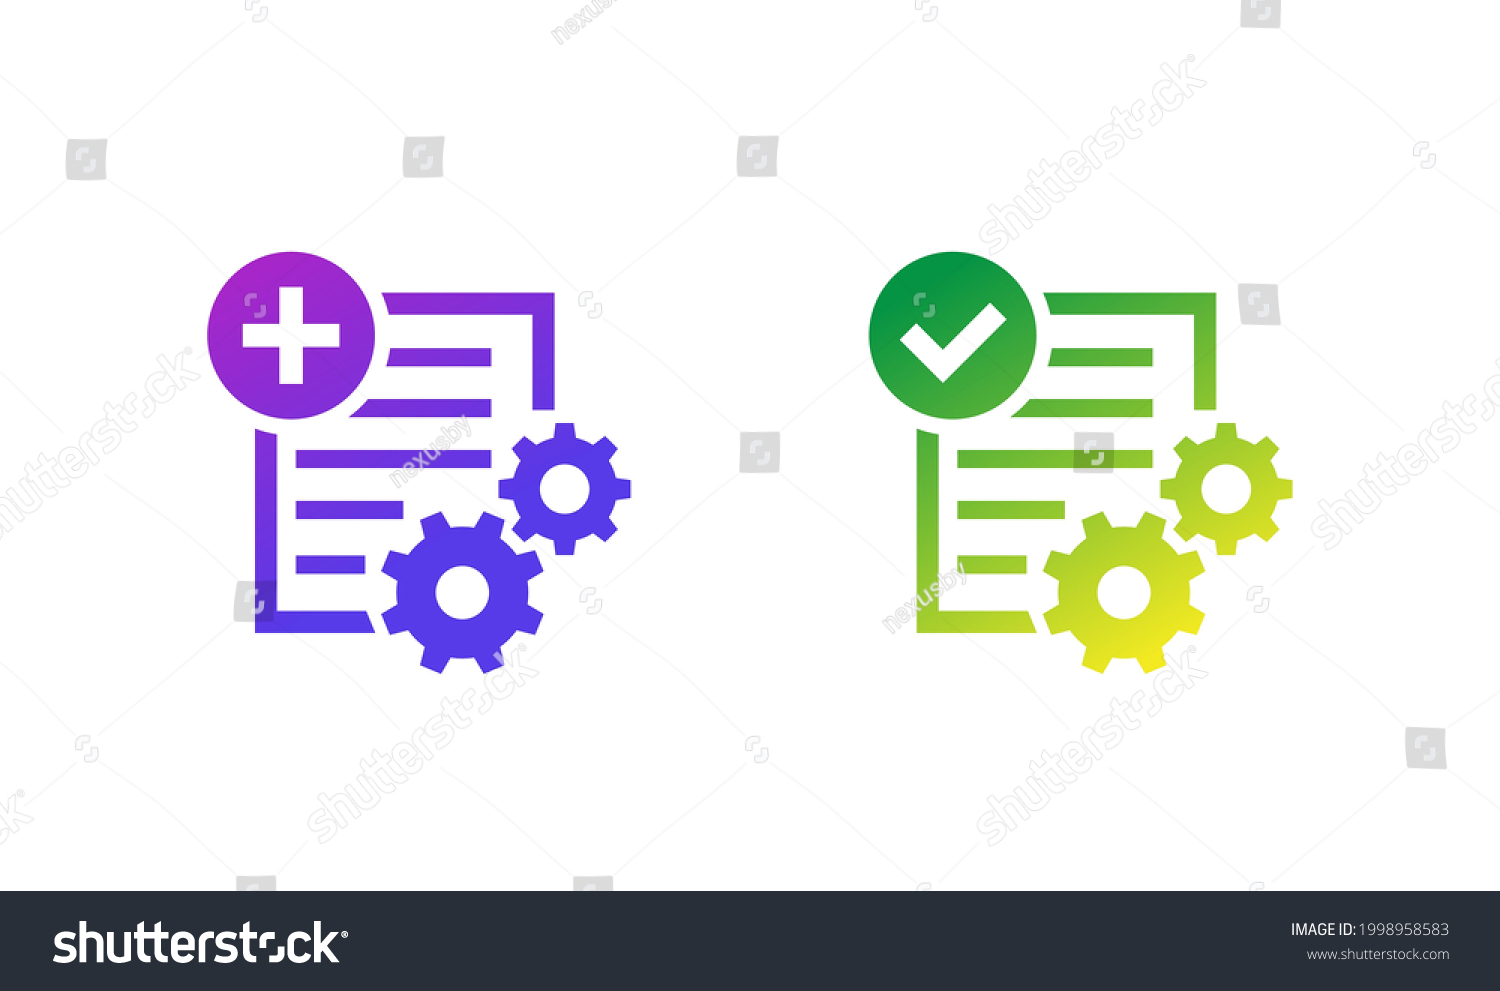 SVG of add new project icons on white svg